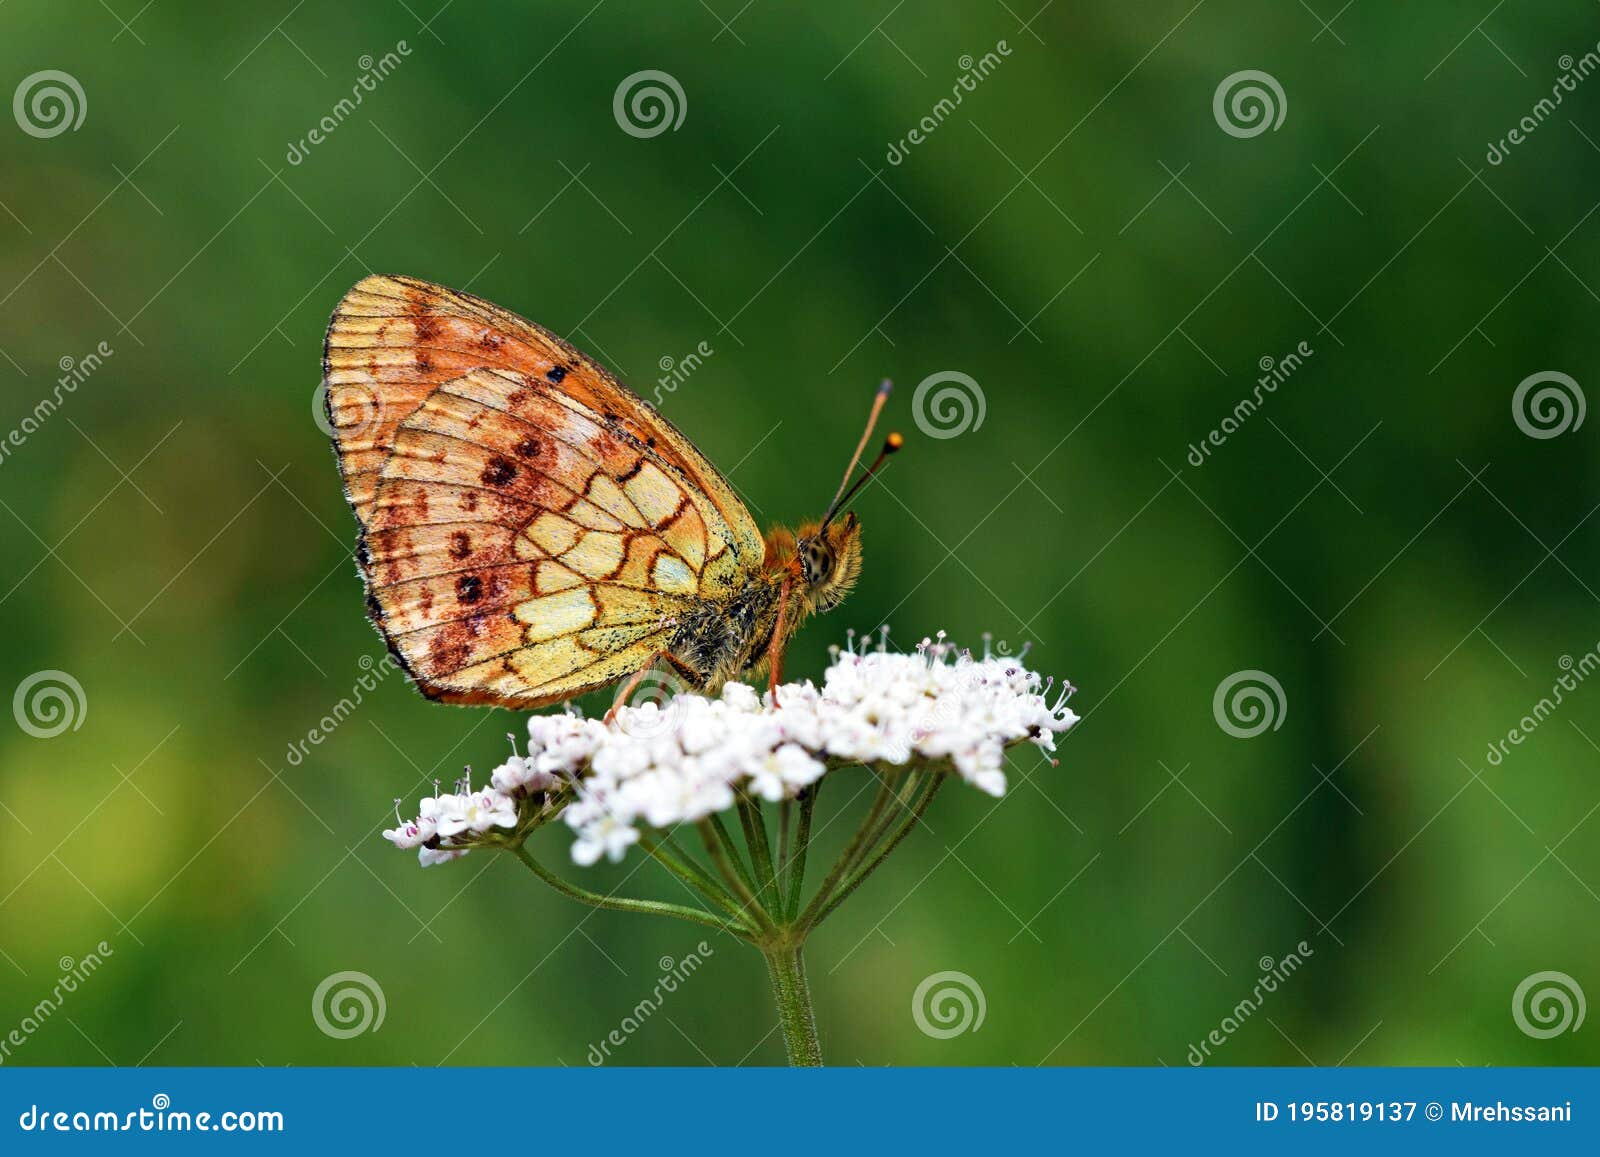 brenthis ino , the lesser marbled fritillary butterfly , butterflies of iran